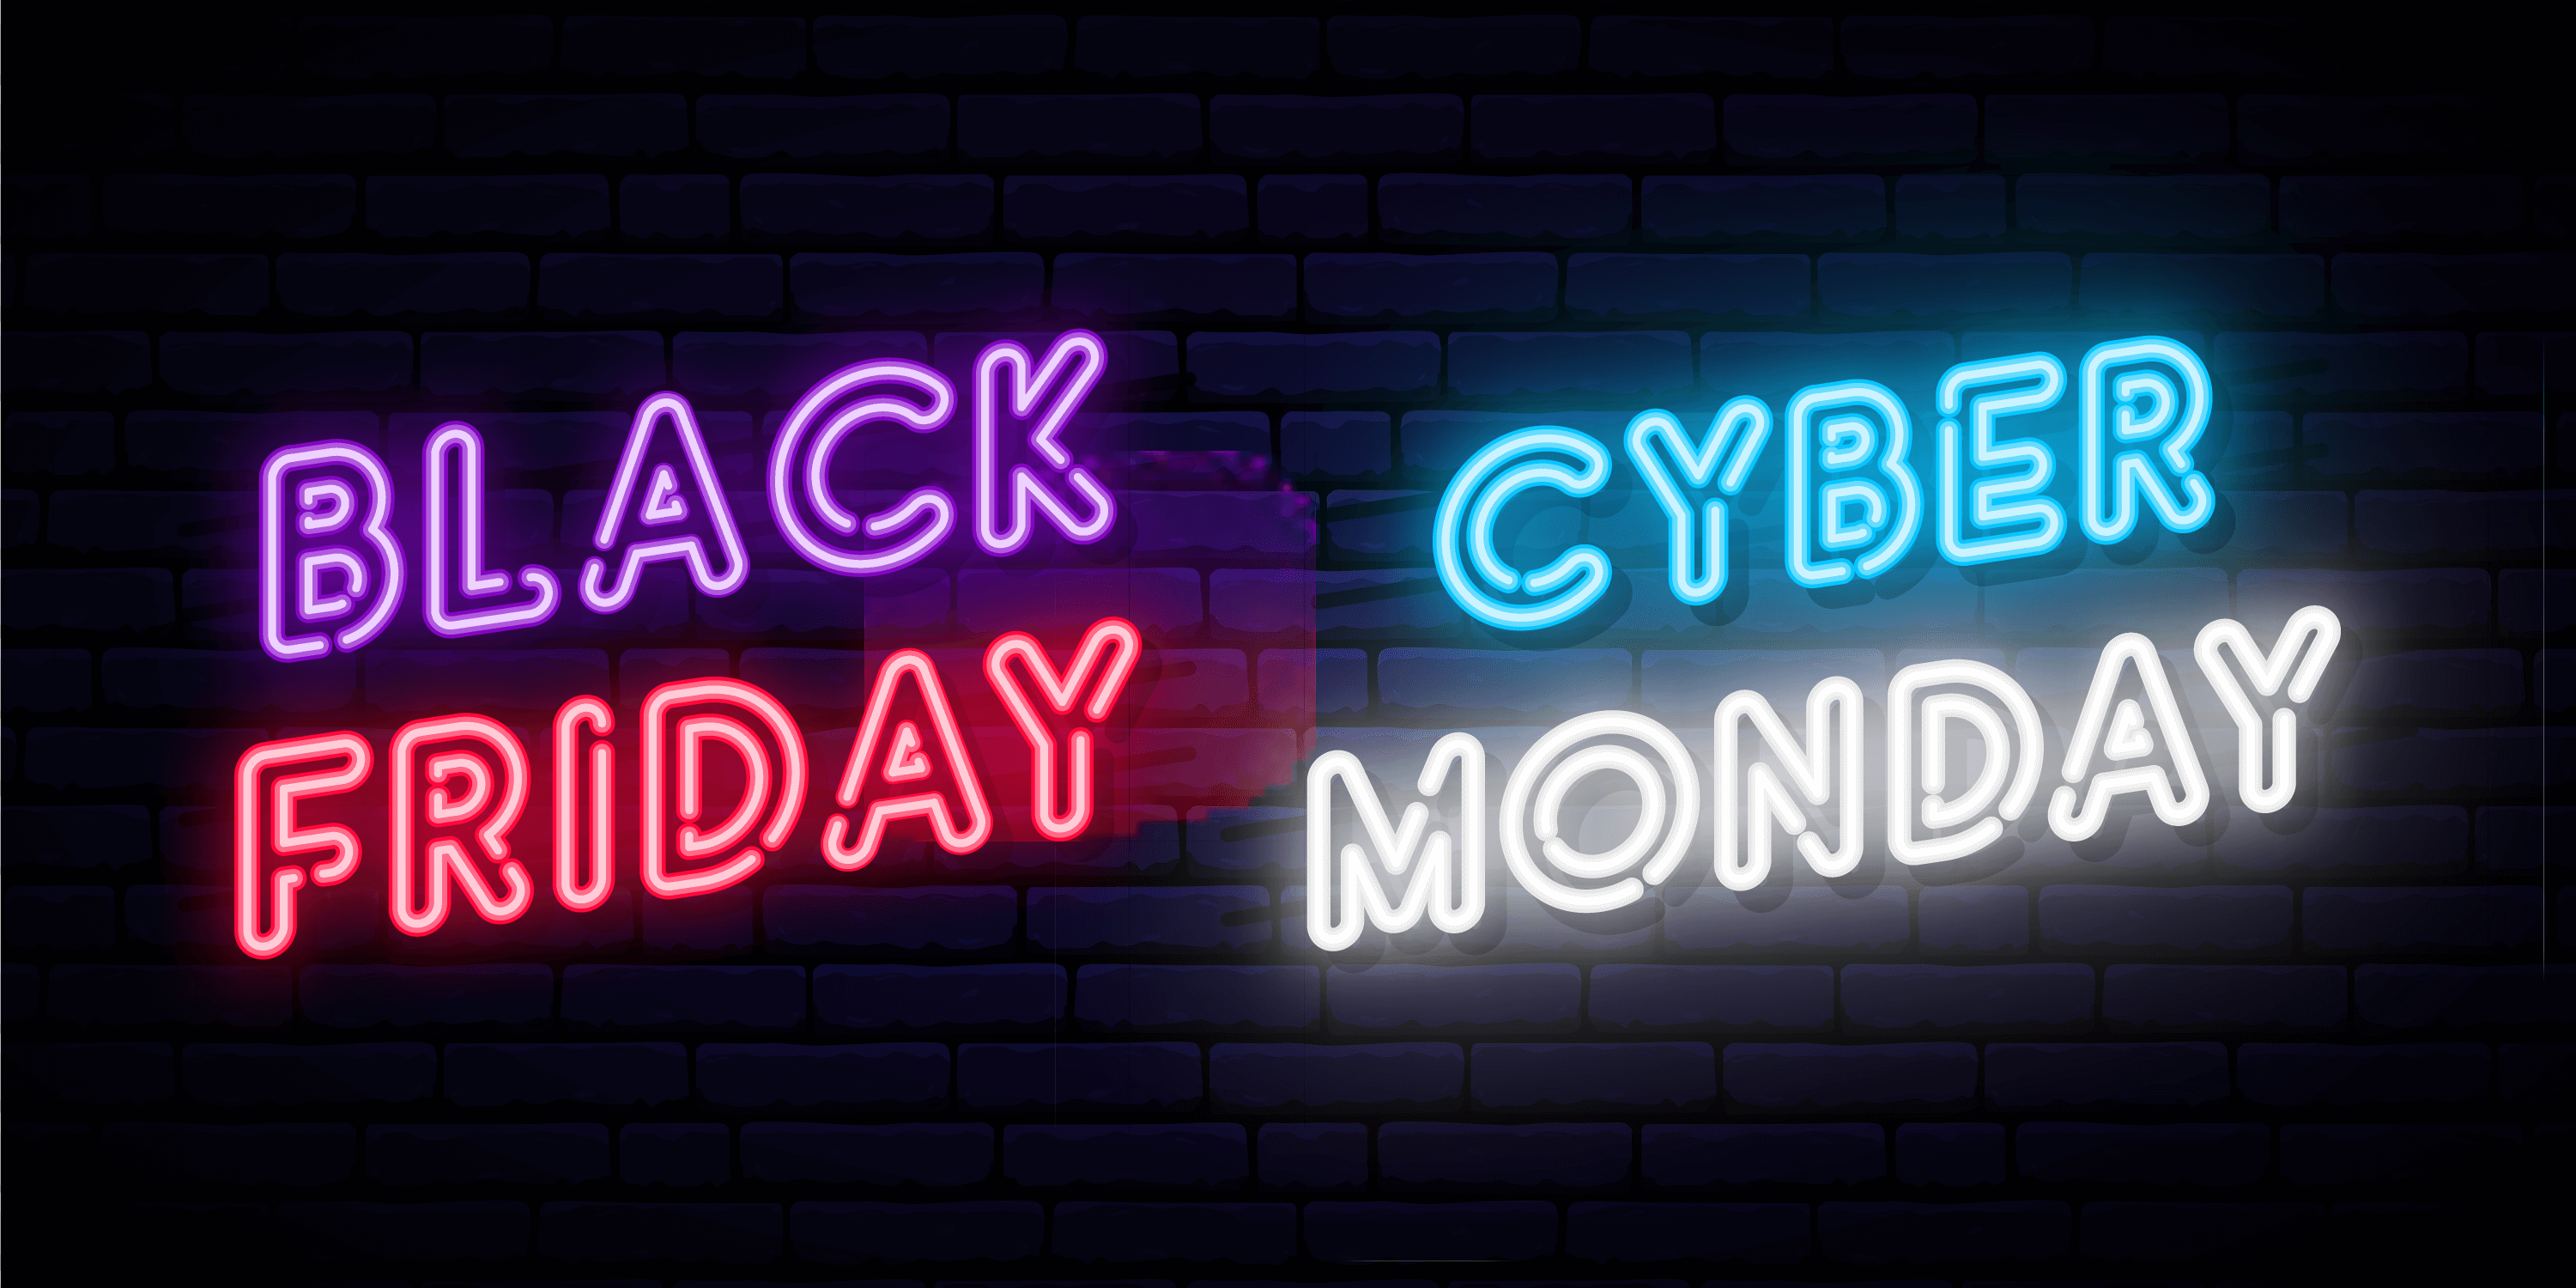 Why retailers need to be cautious this Black Friday and Cyber Monday